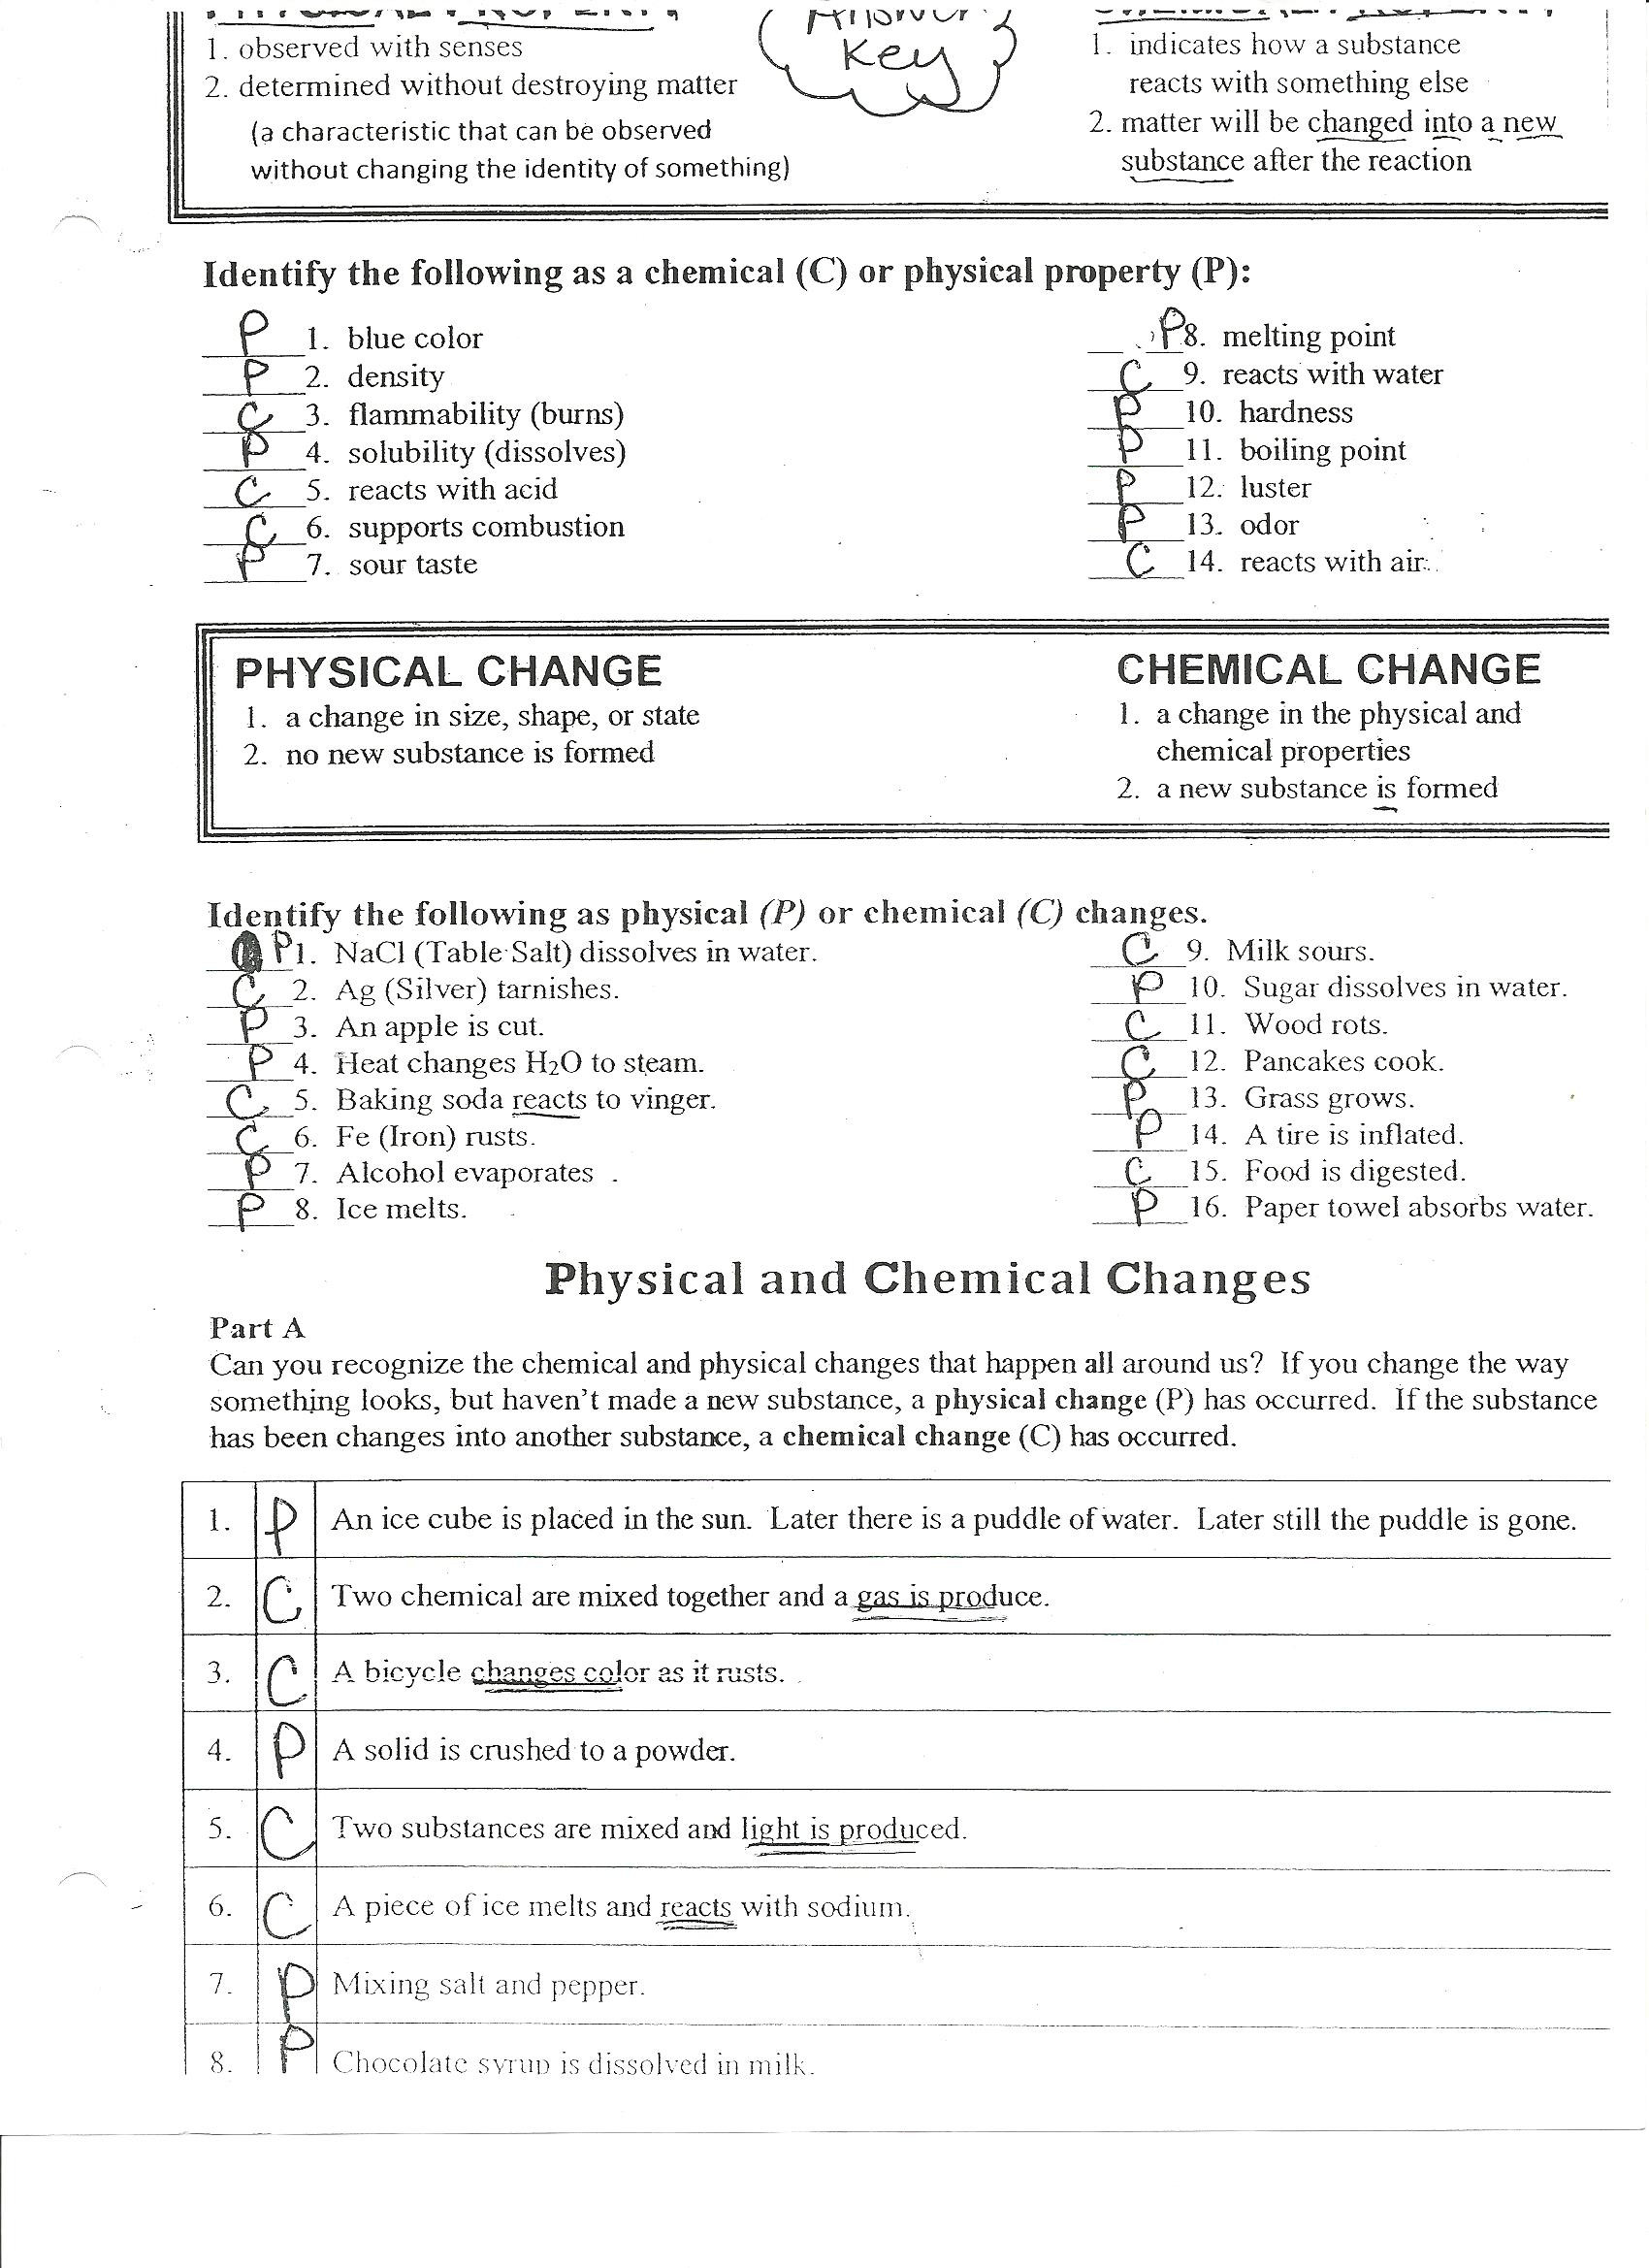 Physical and Chemical Changes Worksheet Chemical and Physical Properties Worksheet Answers